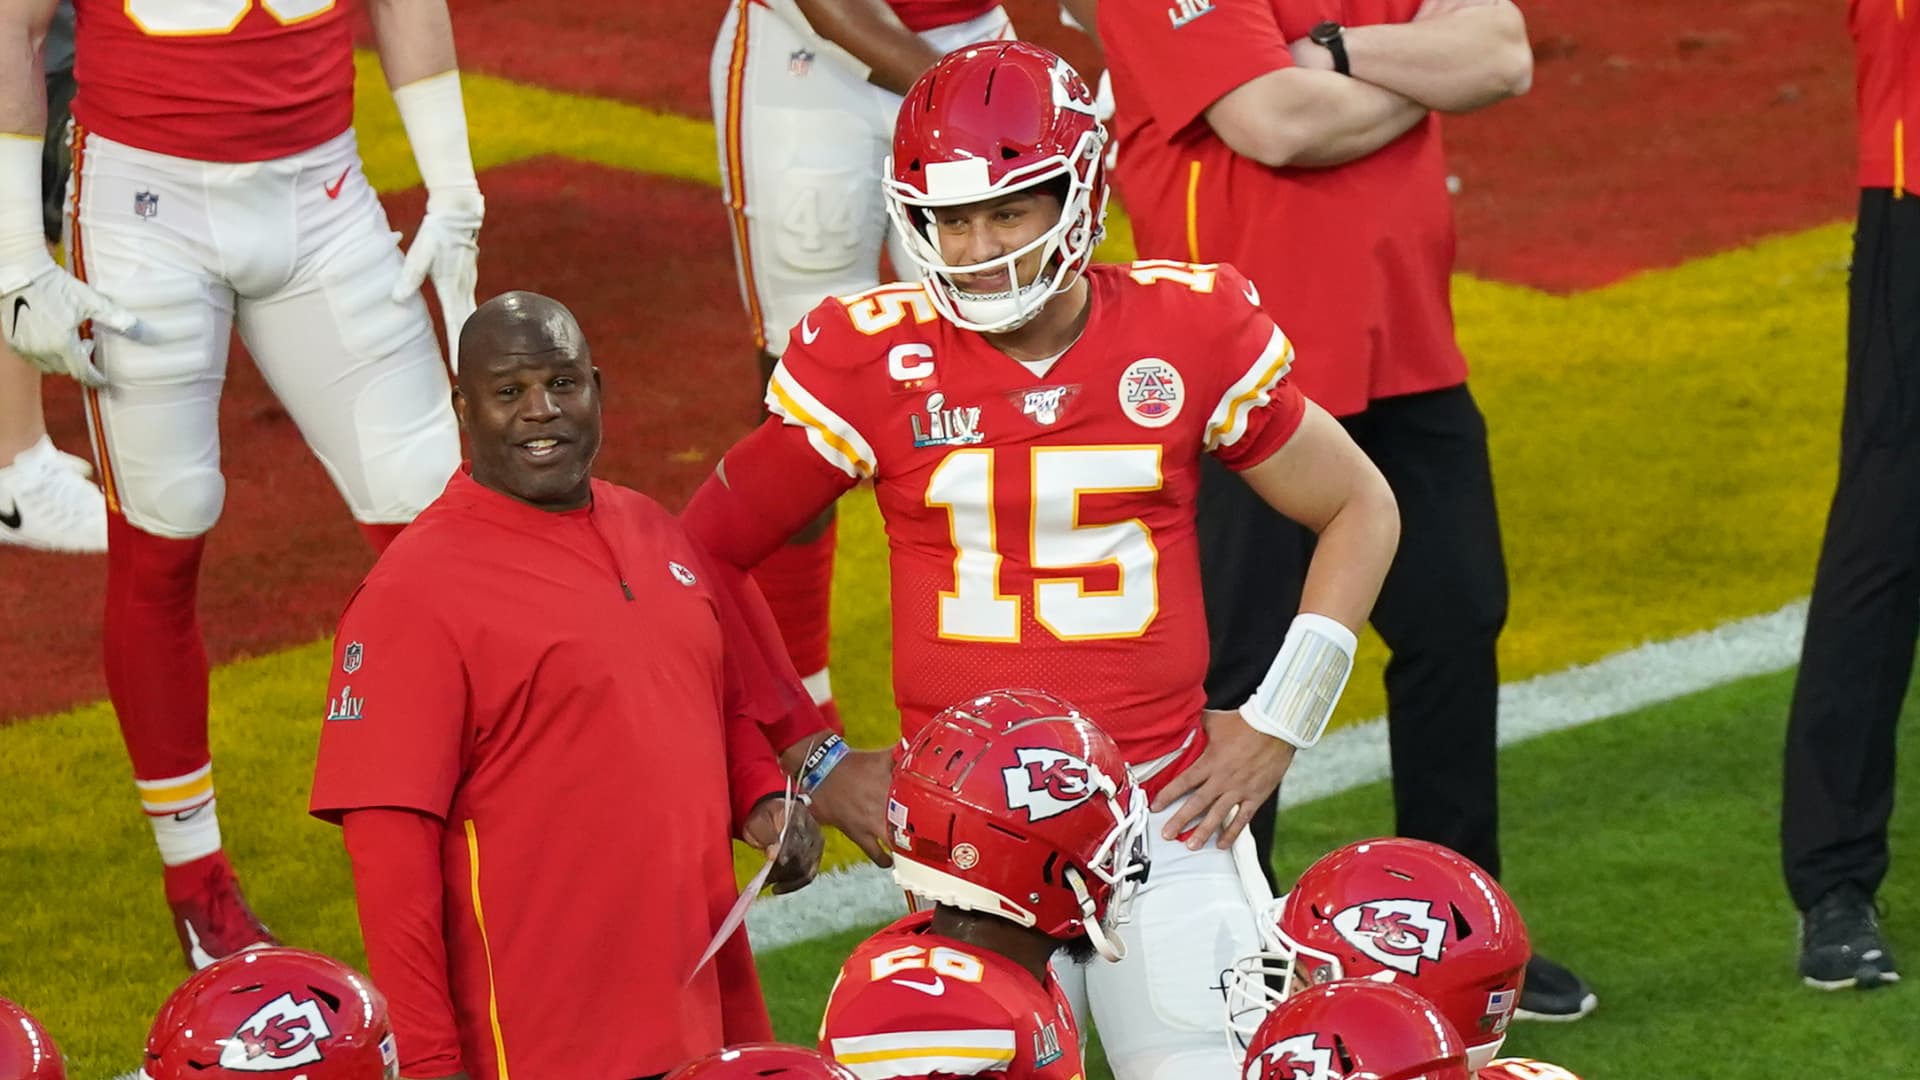 Kansas City Chiefs quarterback Patrick Mahomes (15) talks with Kansas City Chiefs offensive coordinator Eric Bieniemy in game action during the Super Bowl LIV game between the Kansas City Chiefs and the San Francisco 49ers on February 2, 2020 at Hard Rock Stadium, in Miami Gardens, FL.